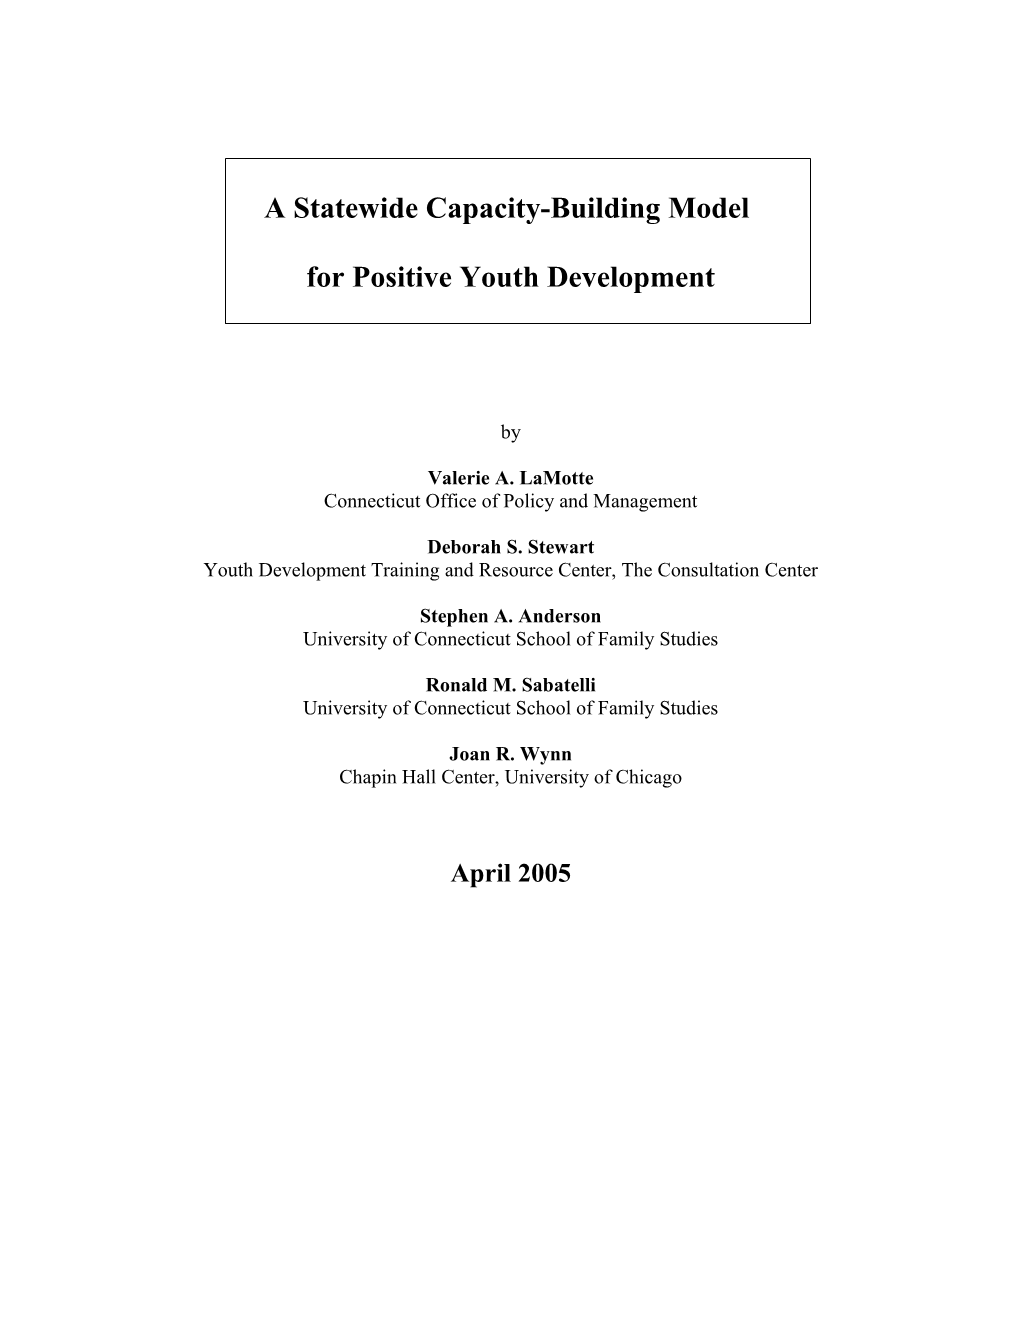 This Article Describes a State-Wide Capacity Building Model That Was Designed to Accomplish